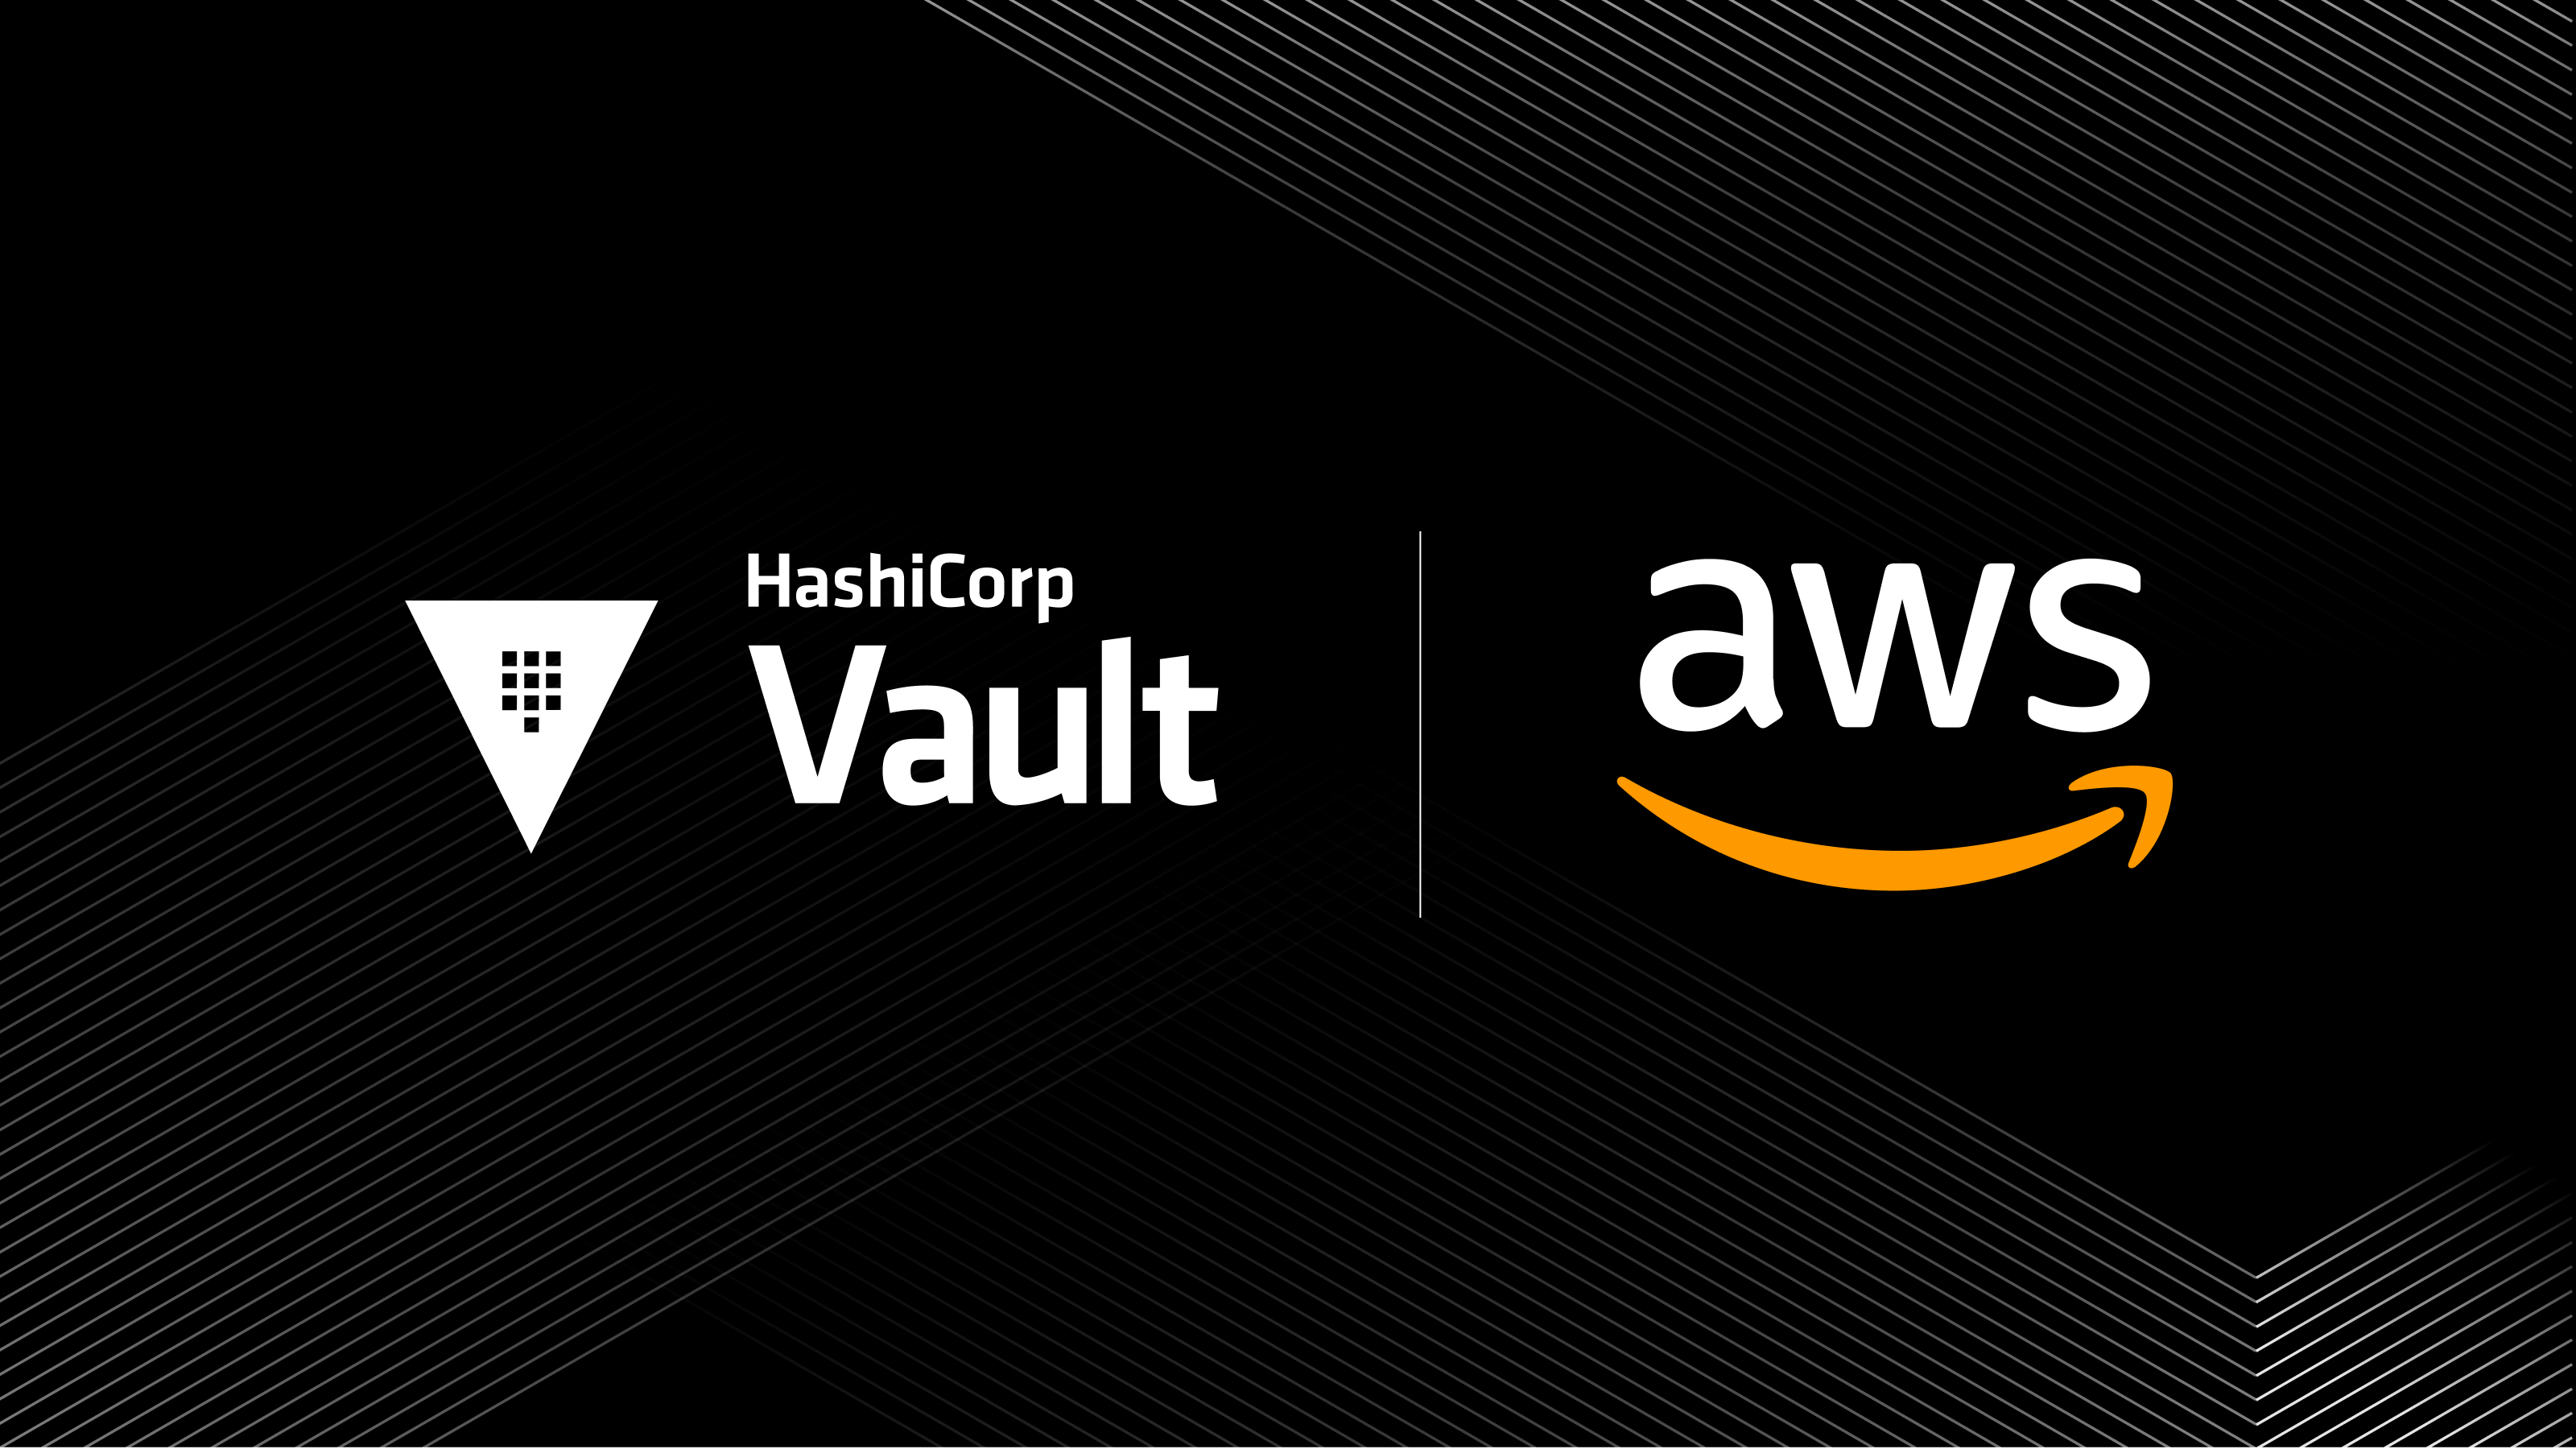 HashiCorp and AWS Make it Easier to Secure Workloads in EKS with Vault